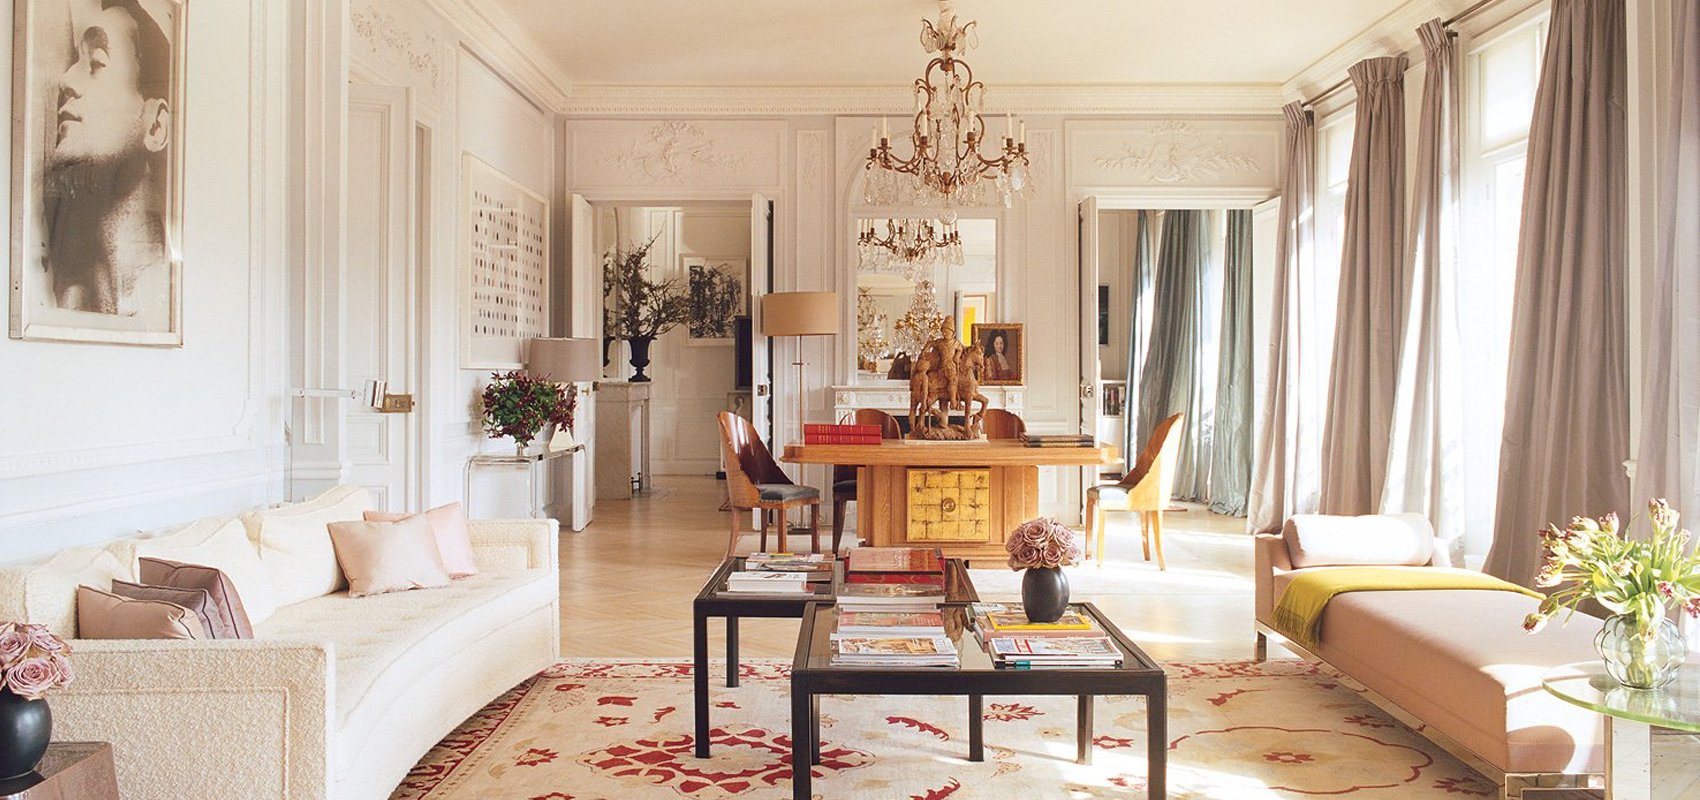 The 5 Must-Haves For A Parisian Apartment Look  Kathy Kuo encequiconcerne Kathy Kuo Blog 